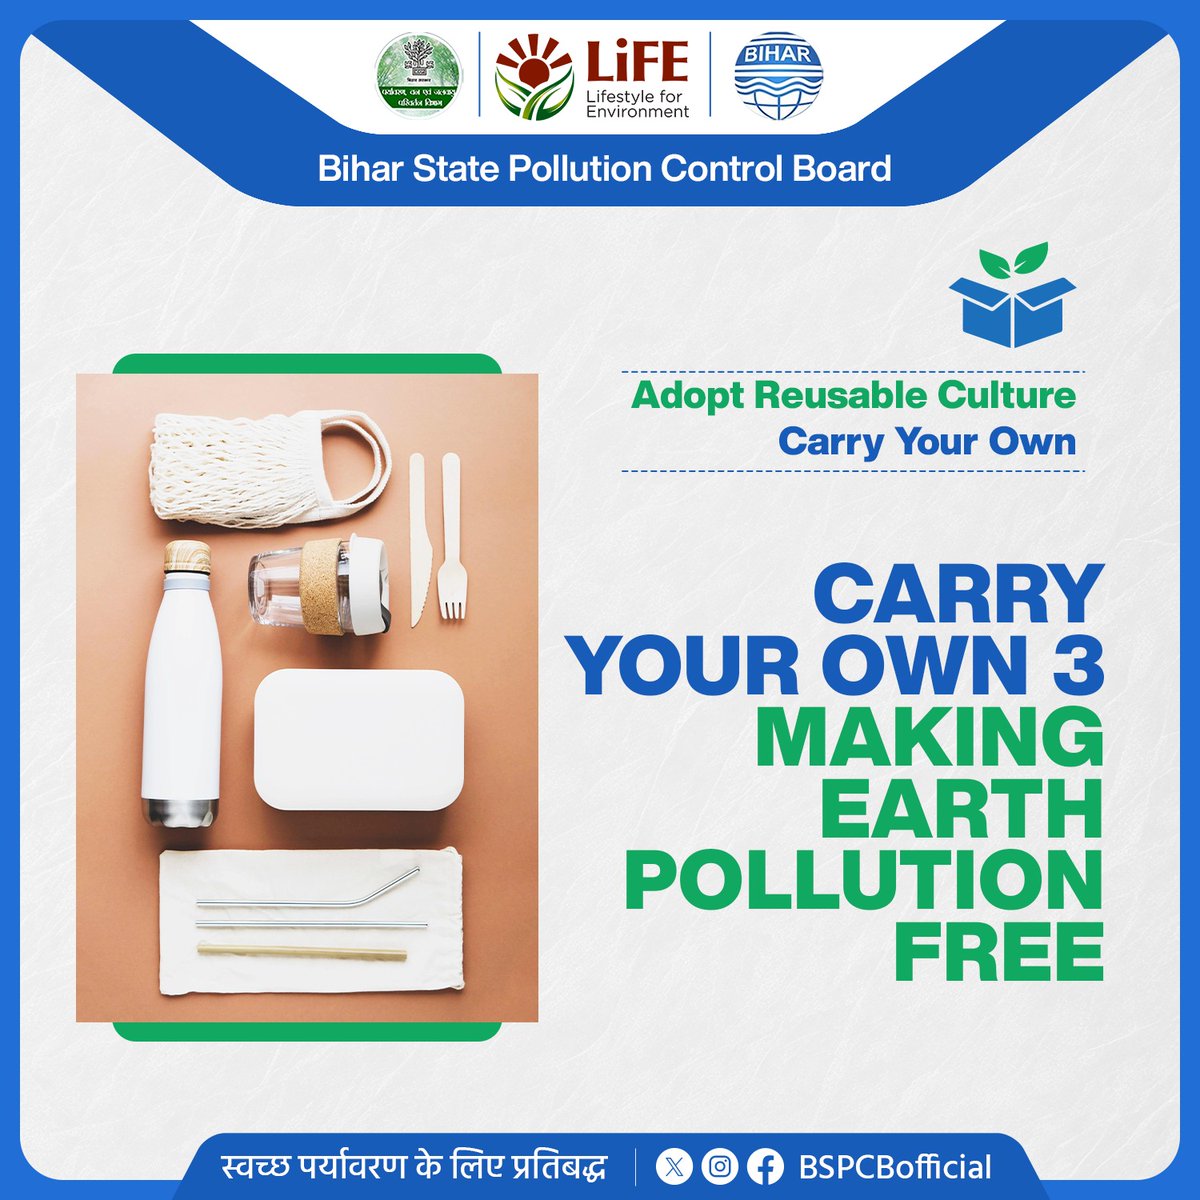 🌍 Carry Your Own 3, Make Earth Pollution-Free! 🌿
Reusable Bags 🛍️
Water Bottles 🚰
Coffee Cups ☕
Let's reduce waste and protect our planet. Every small step counts! 🌱

#Sustainability #GoGreen #ReduceReuseRecycle #EcoFriendly #PollutionFreePlanet